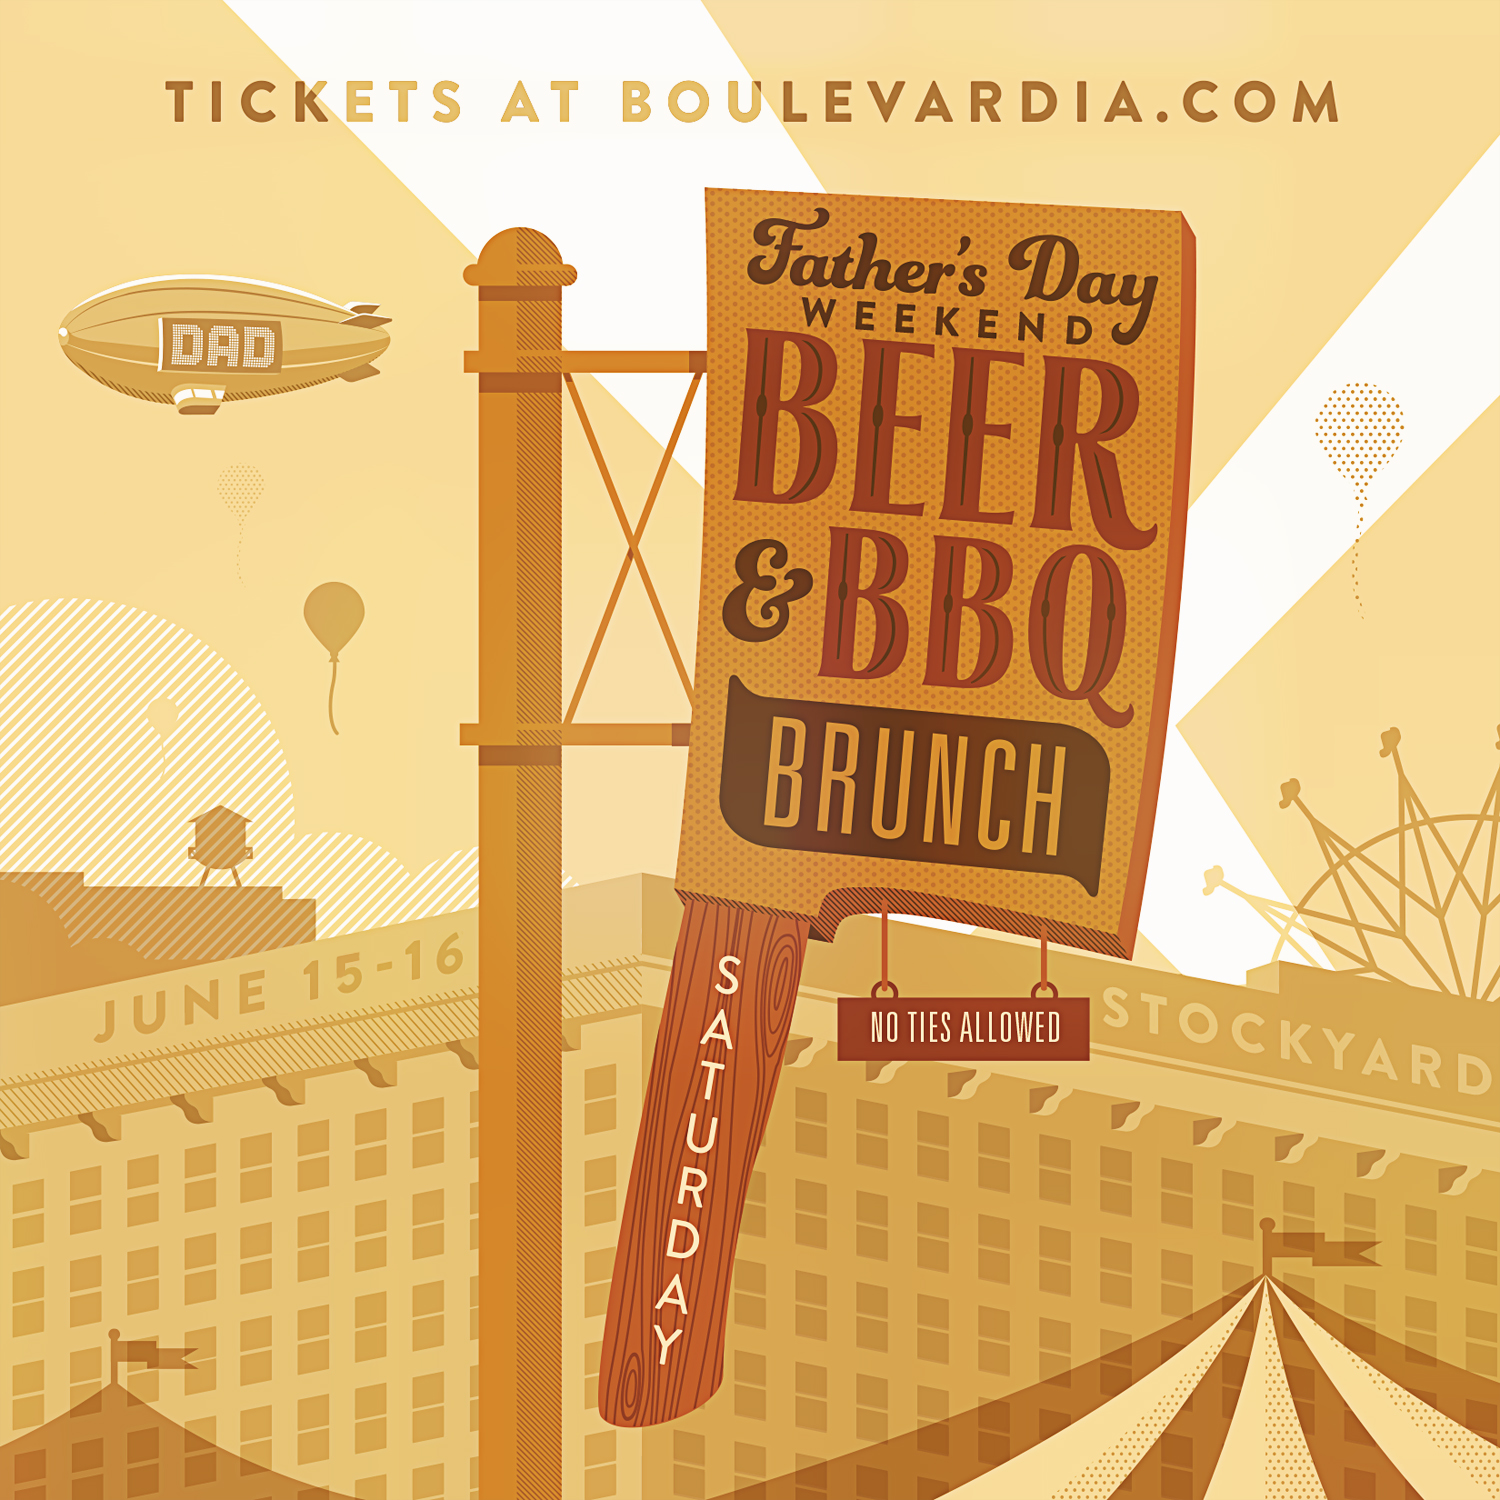 Limited tickets left for special experiences at Boulevardia ...